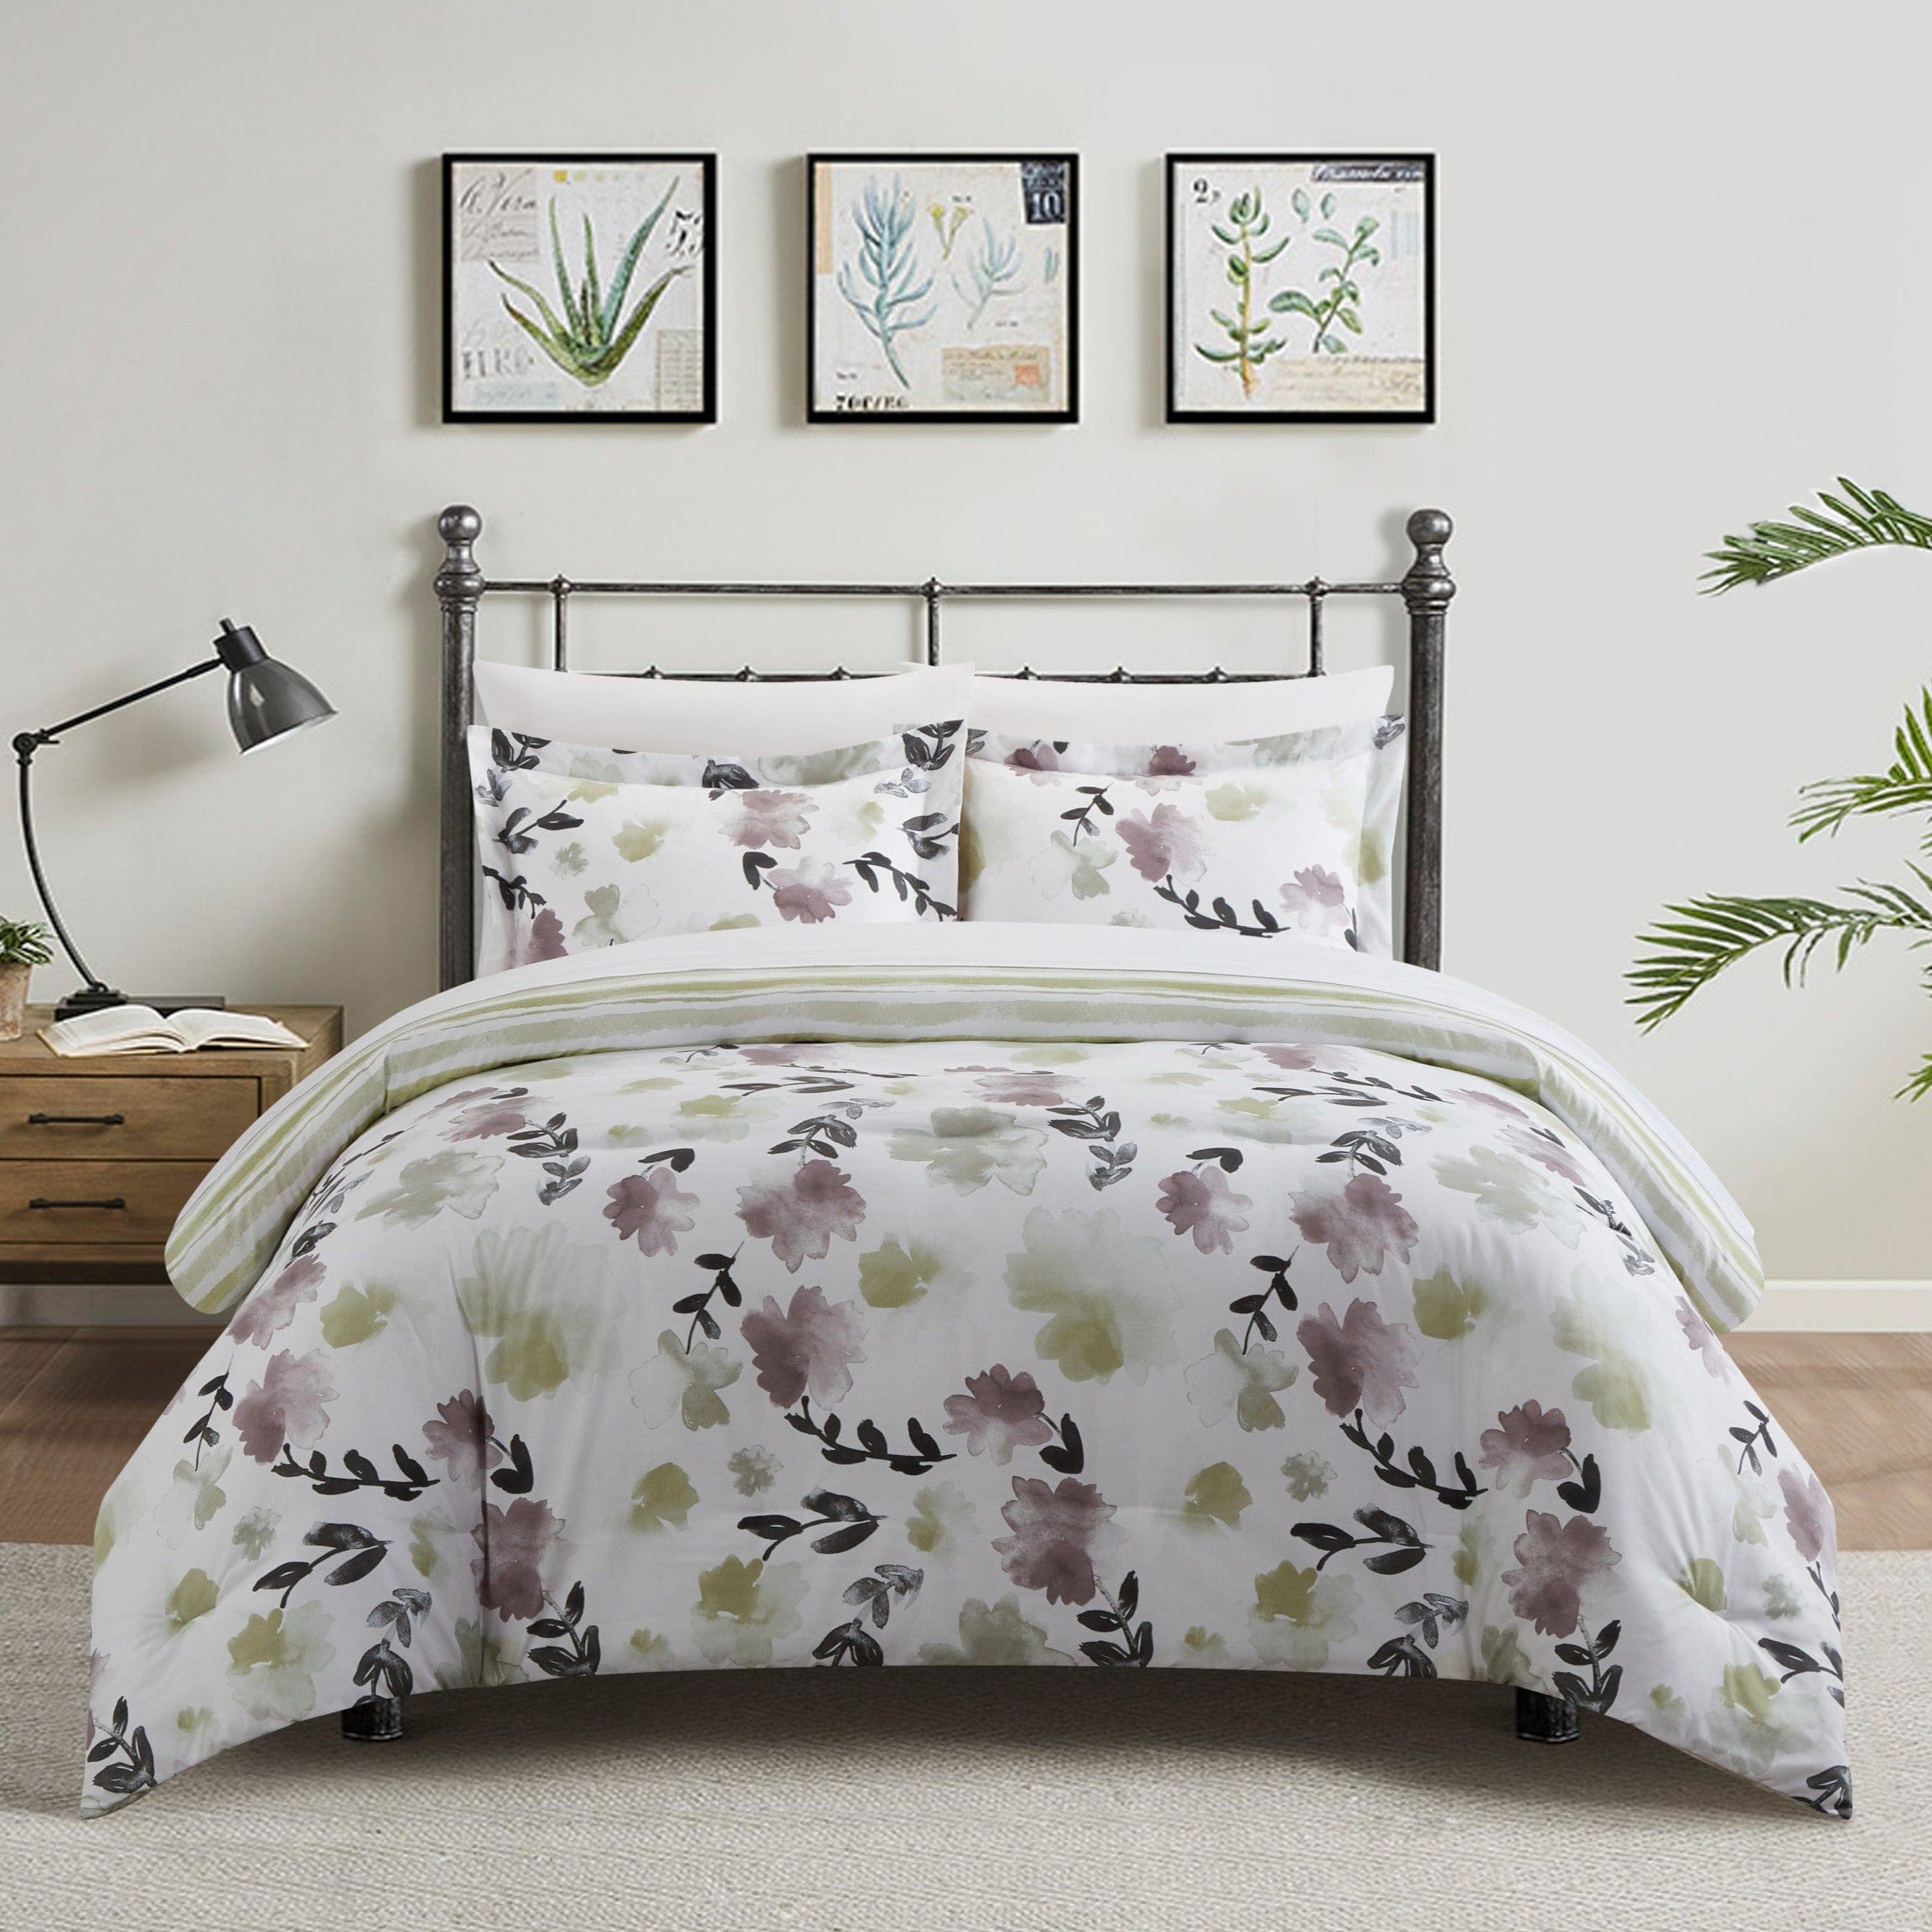 Floral-print duvet cover queen bed - Home